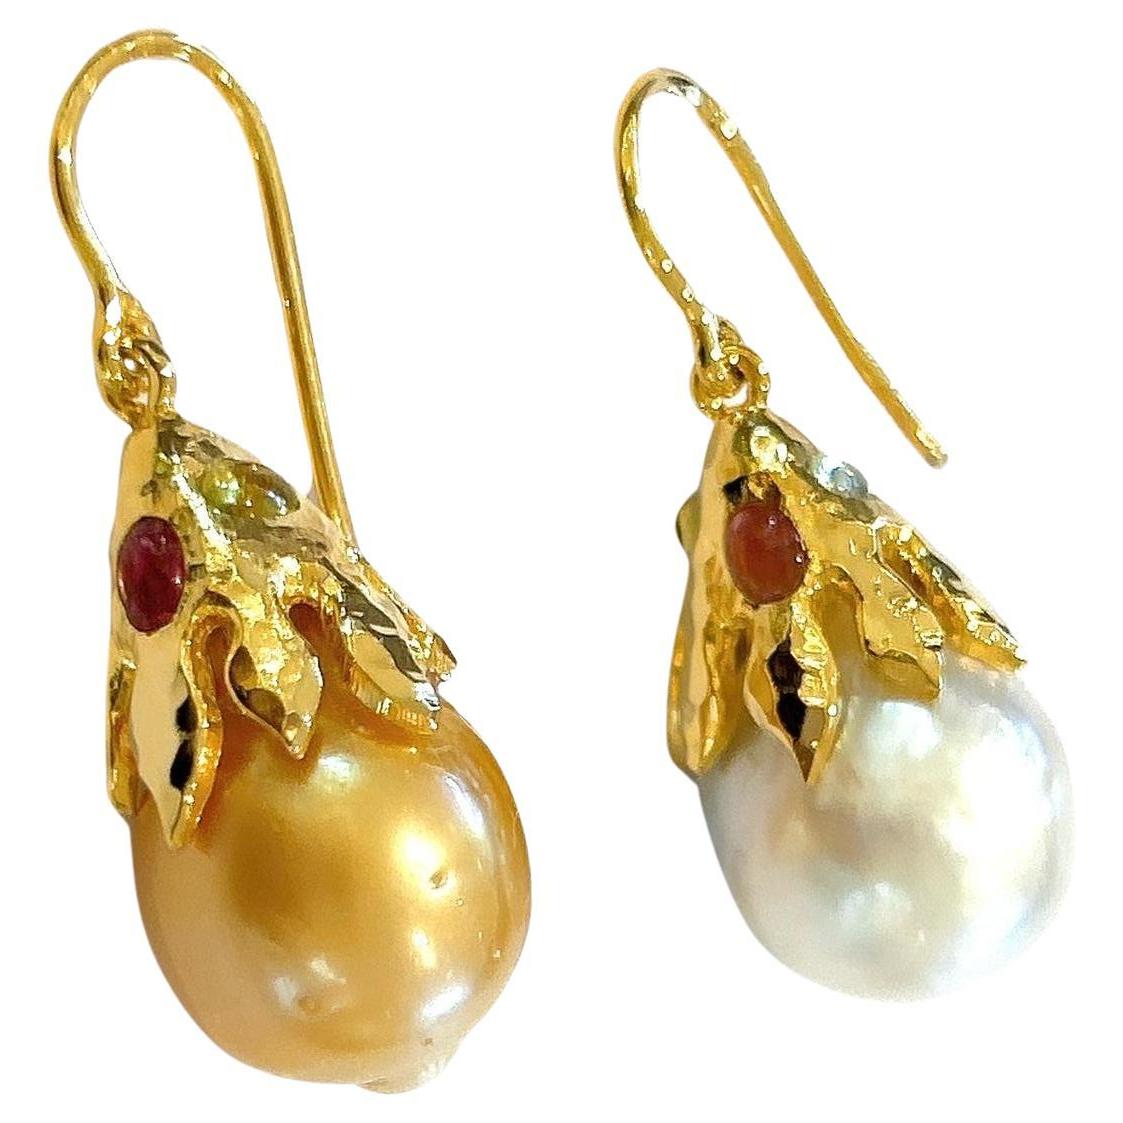 Bochic “Orient” South Sea Pearl & Tourmaline Earrings Set In 18K Gold & Silver 

South Sea Pearl in Golden and White colors 
Drop shape 

Multi Color Tourmalines - 2 Carats

The earrings from the 